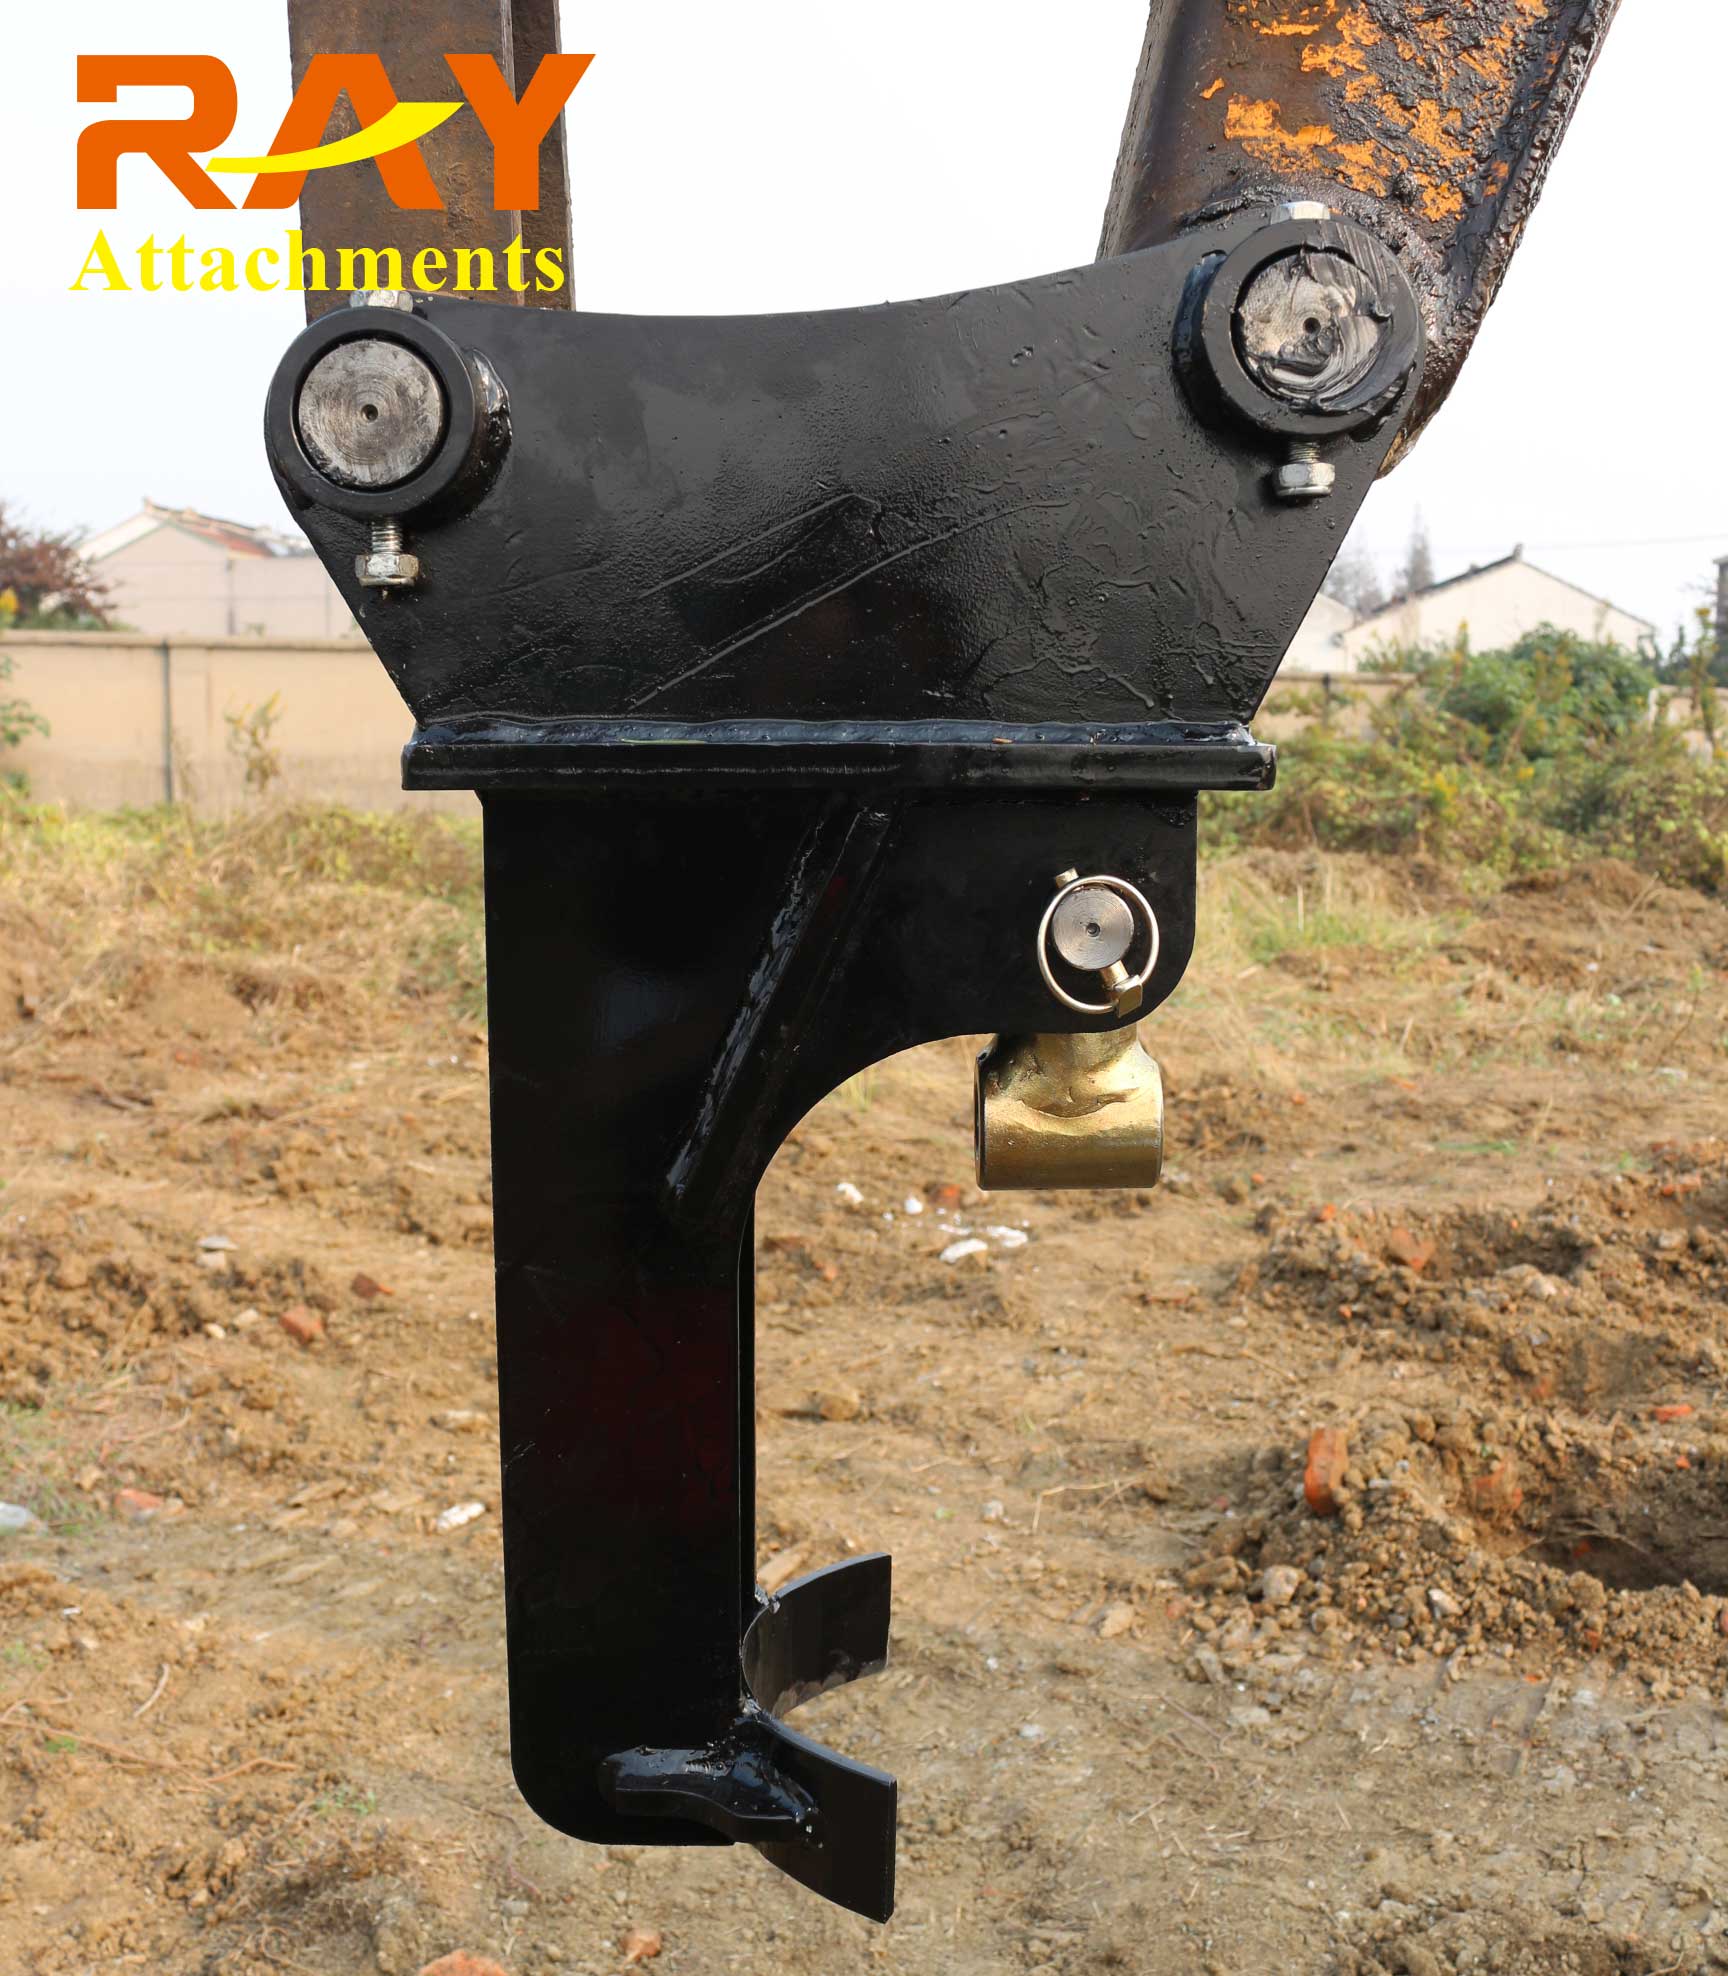 REA20000 model hydraulic Earth Auger drilling